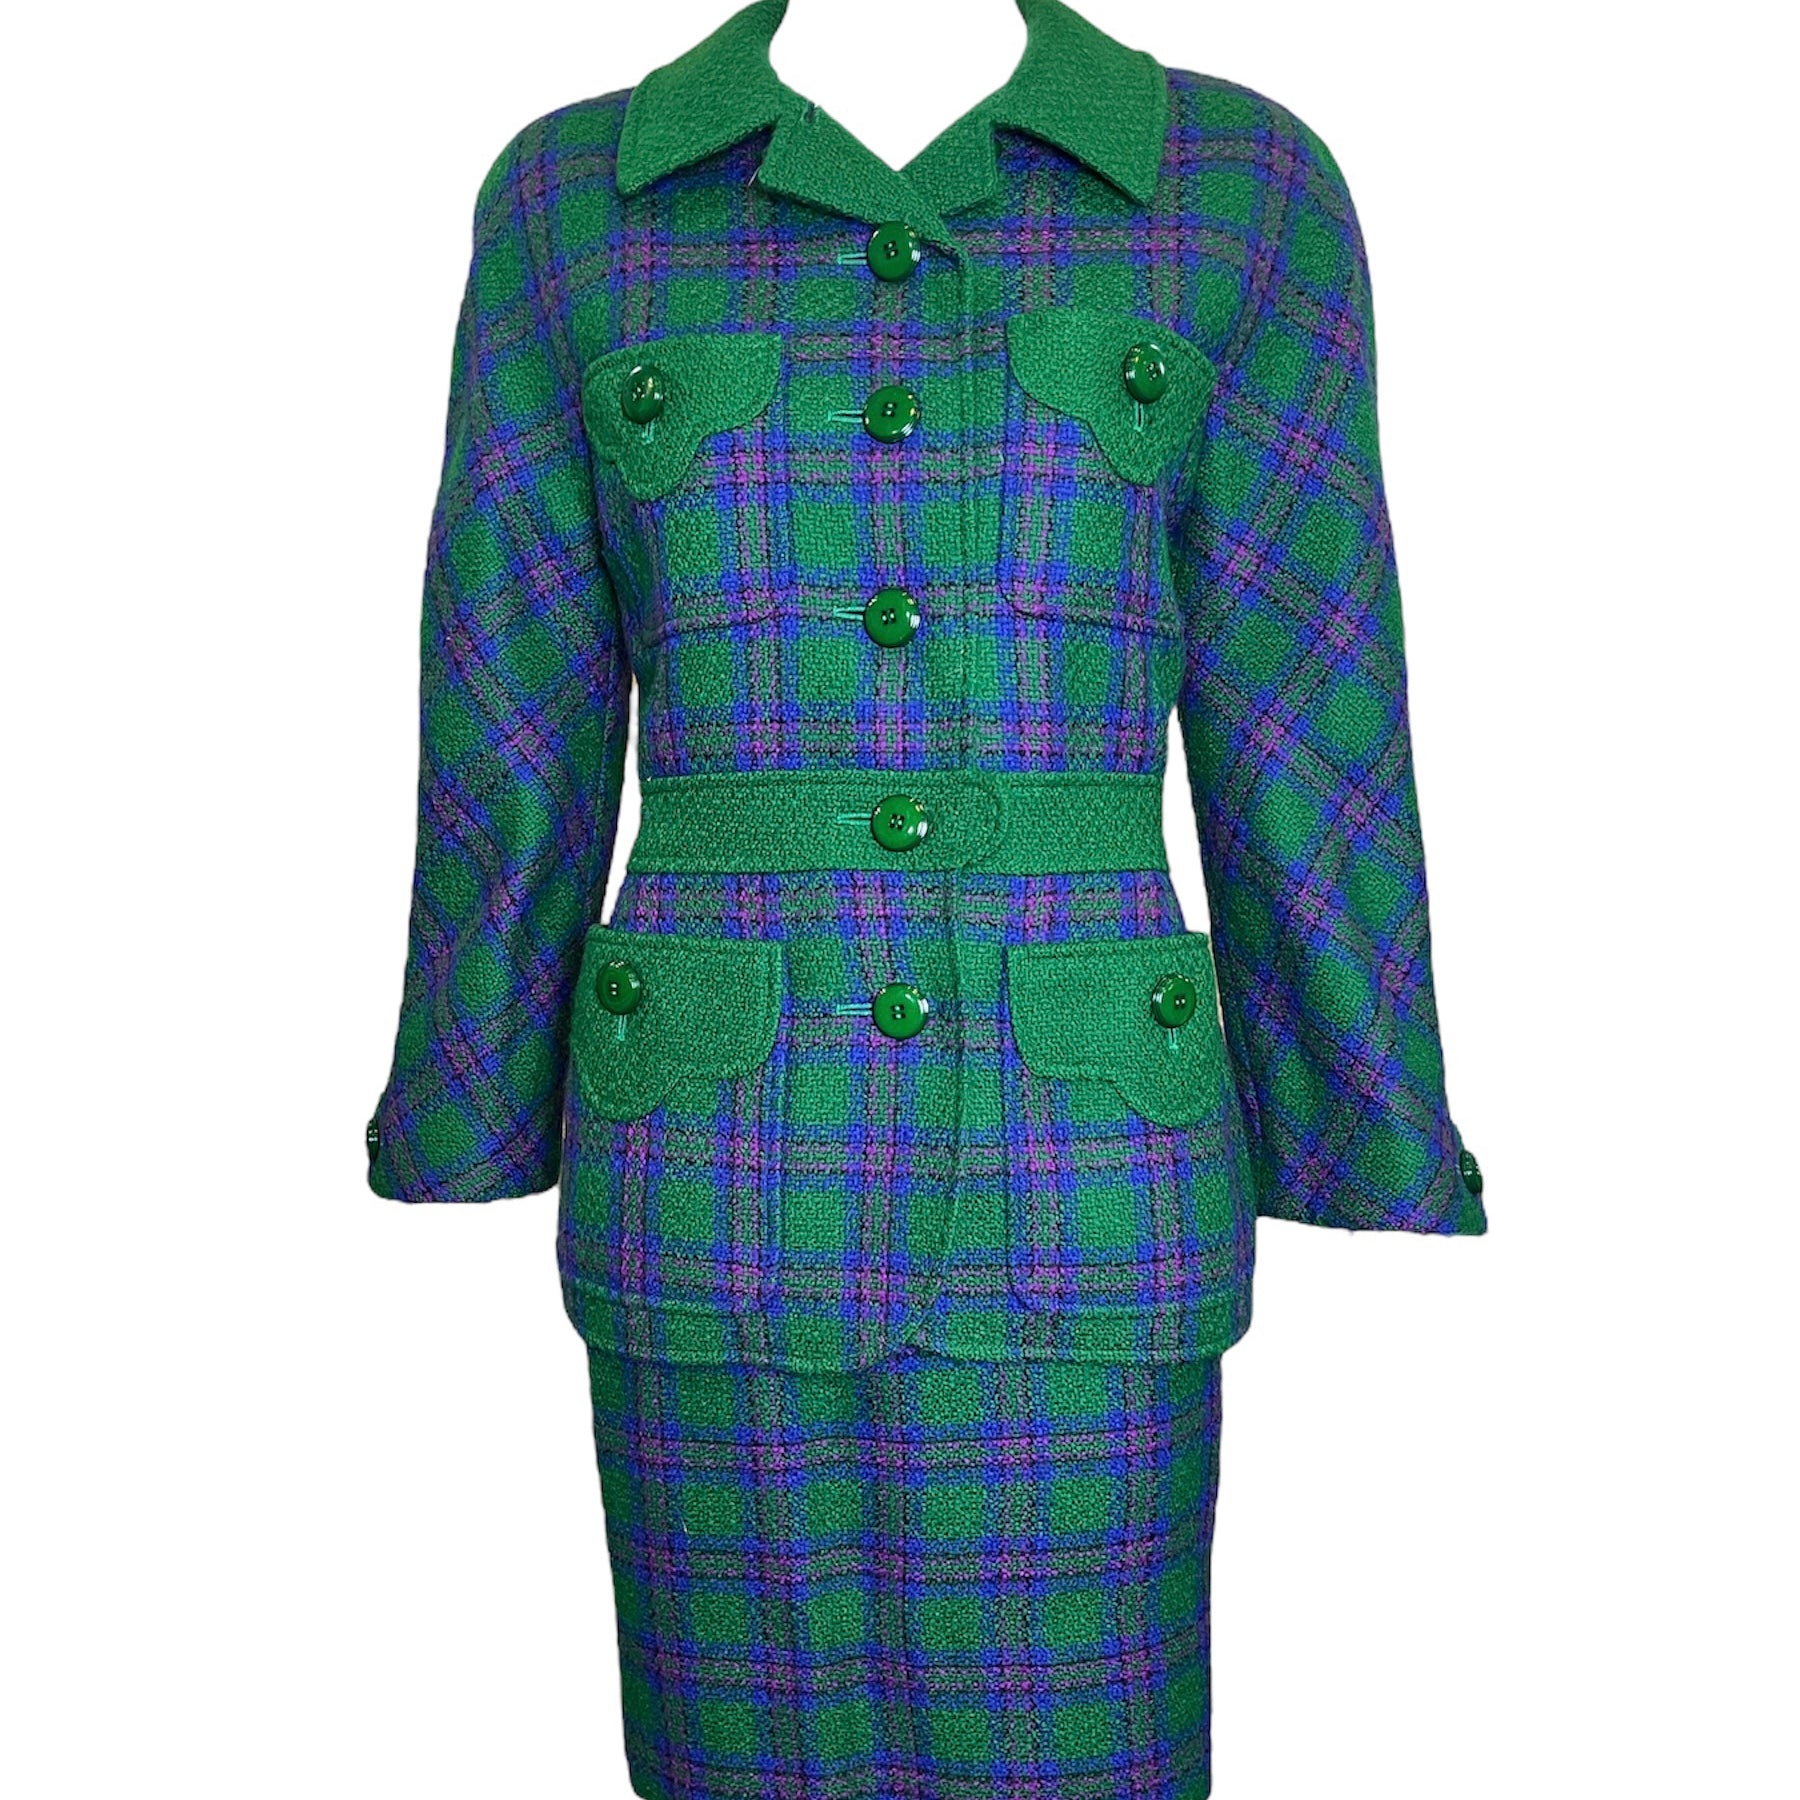  Valentino Boutique 80s Green, Purple and Fuschia Plaid  Skirt Suit Ensemble FRONT 1 of 7